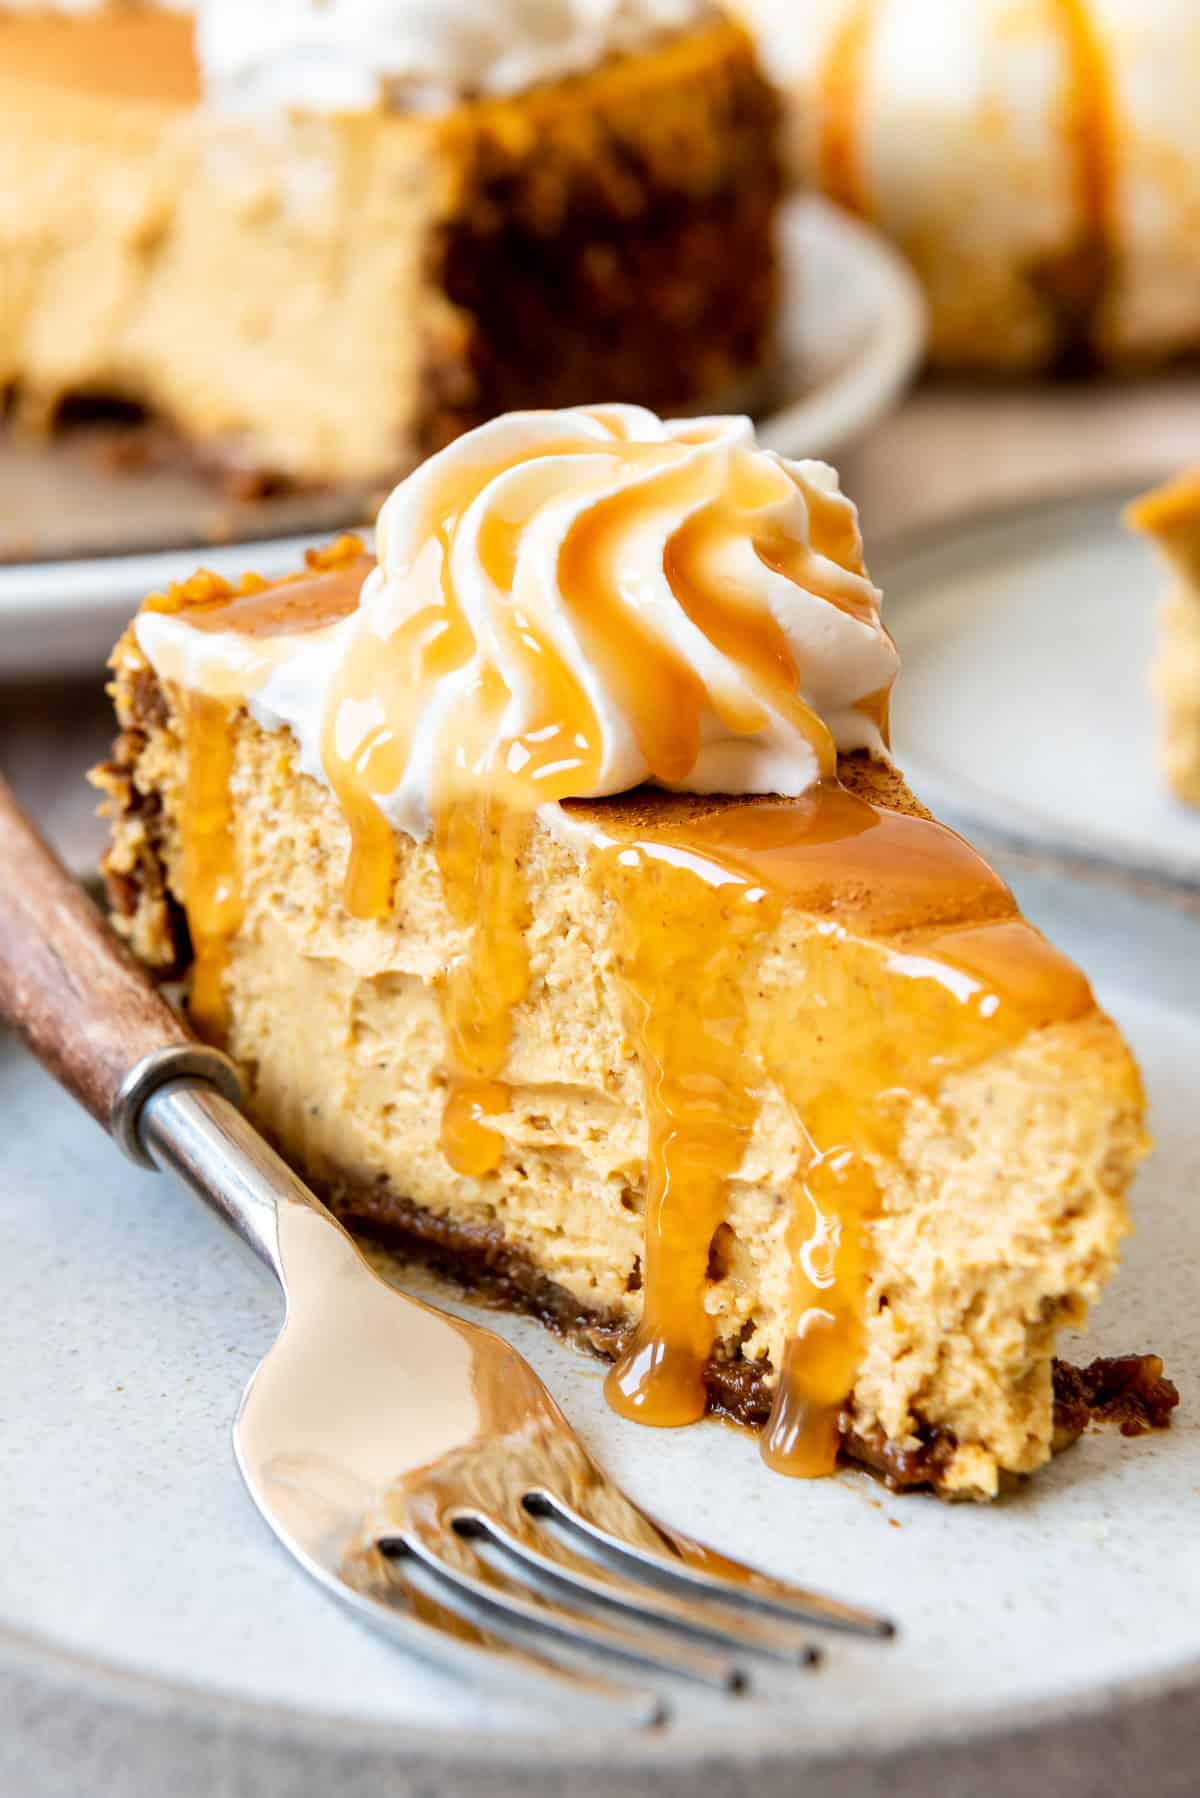 A slice of pumpkin cheesecake with whipped cream and caramel on top.